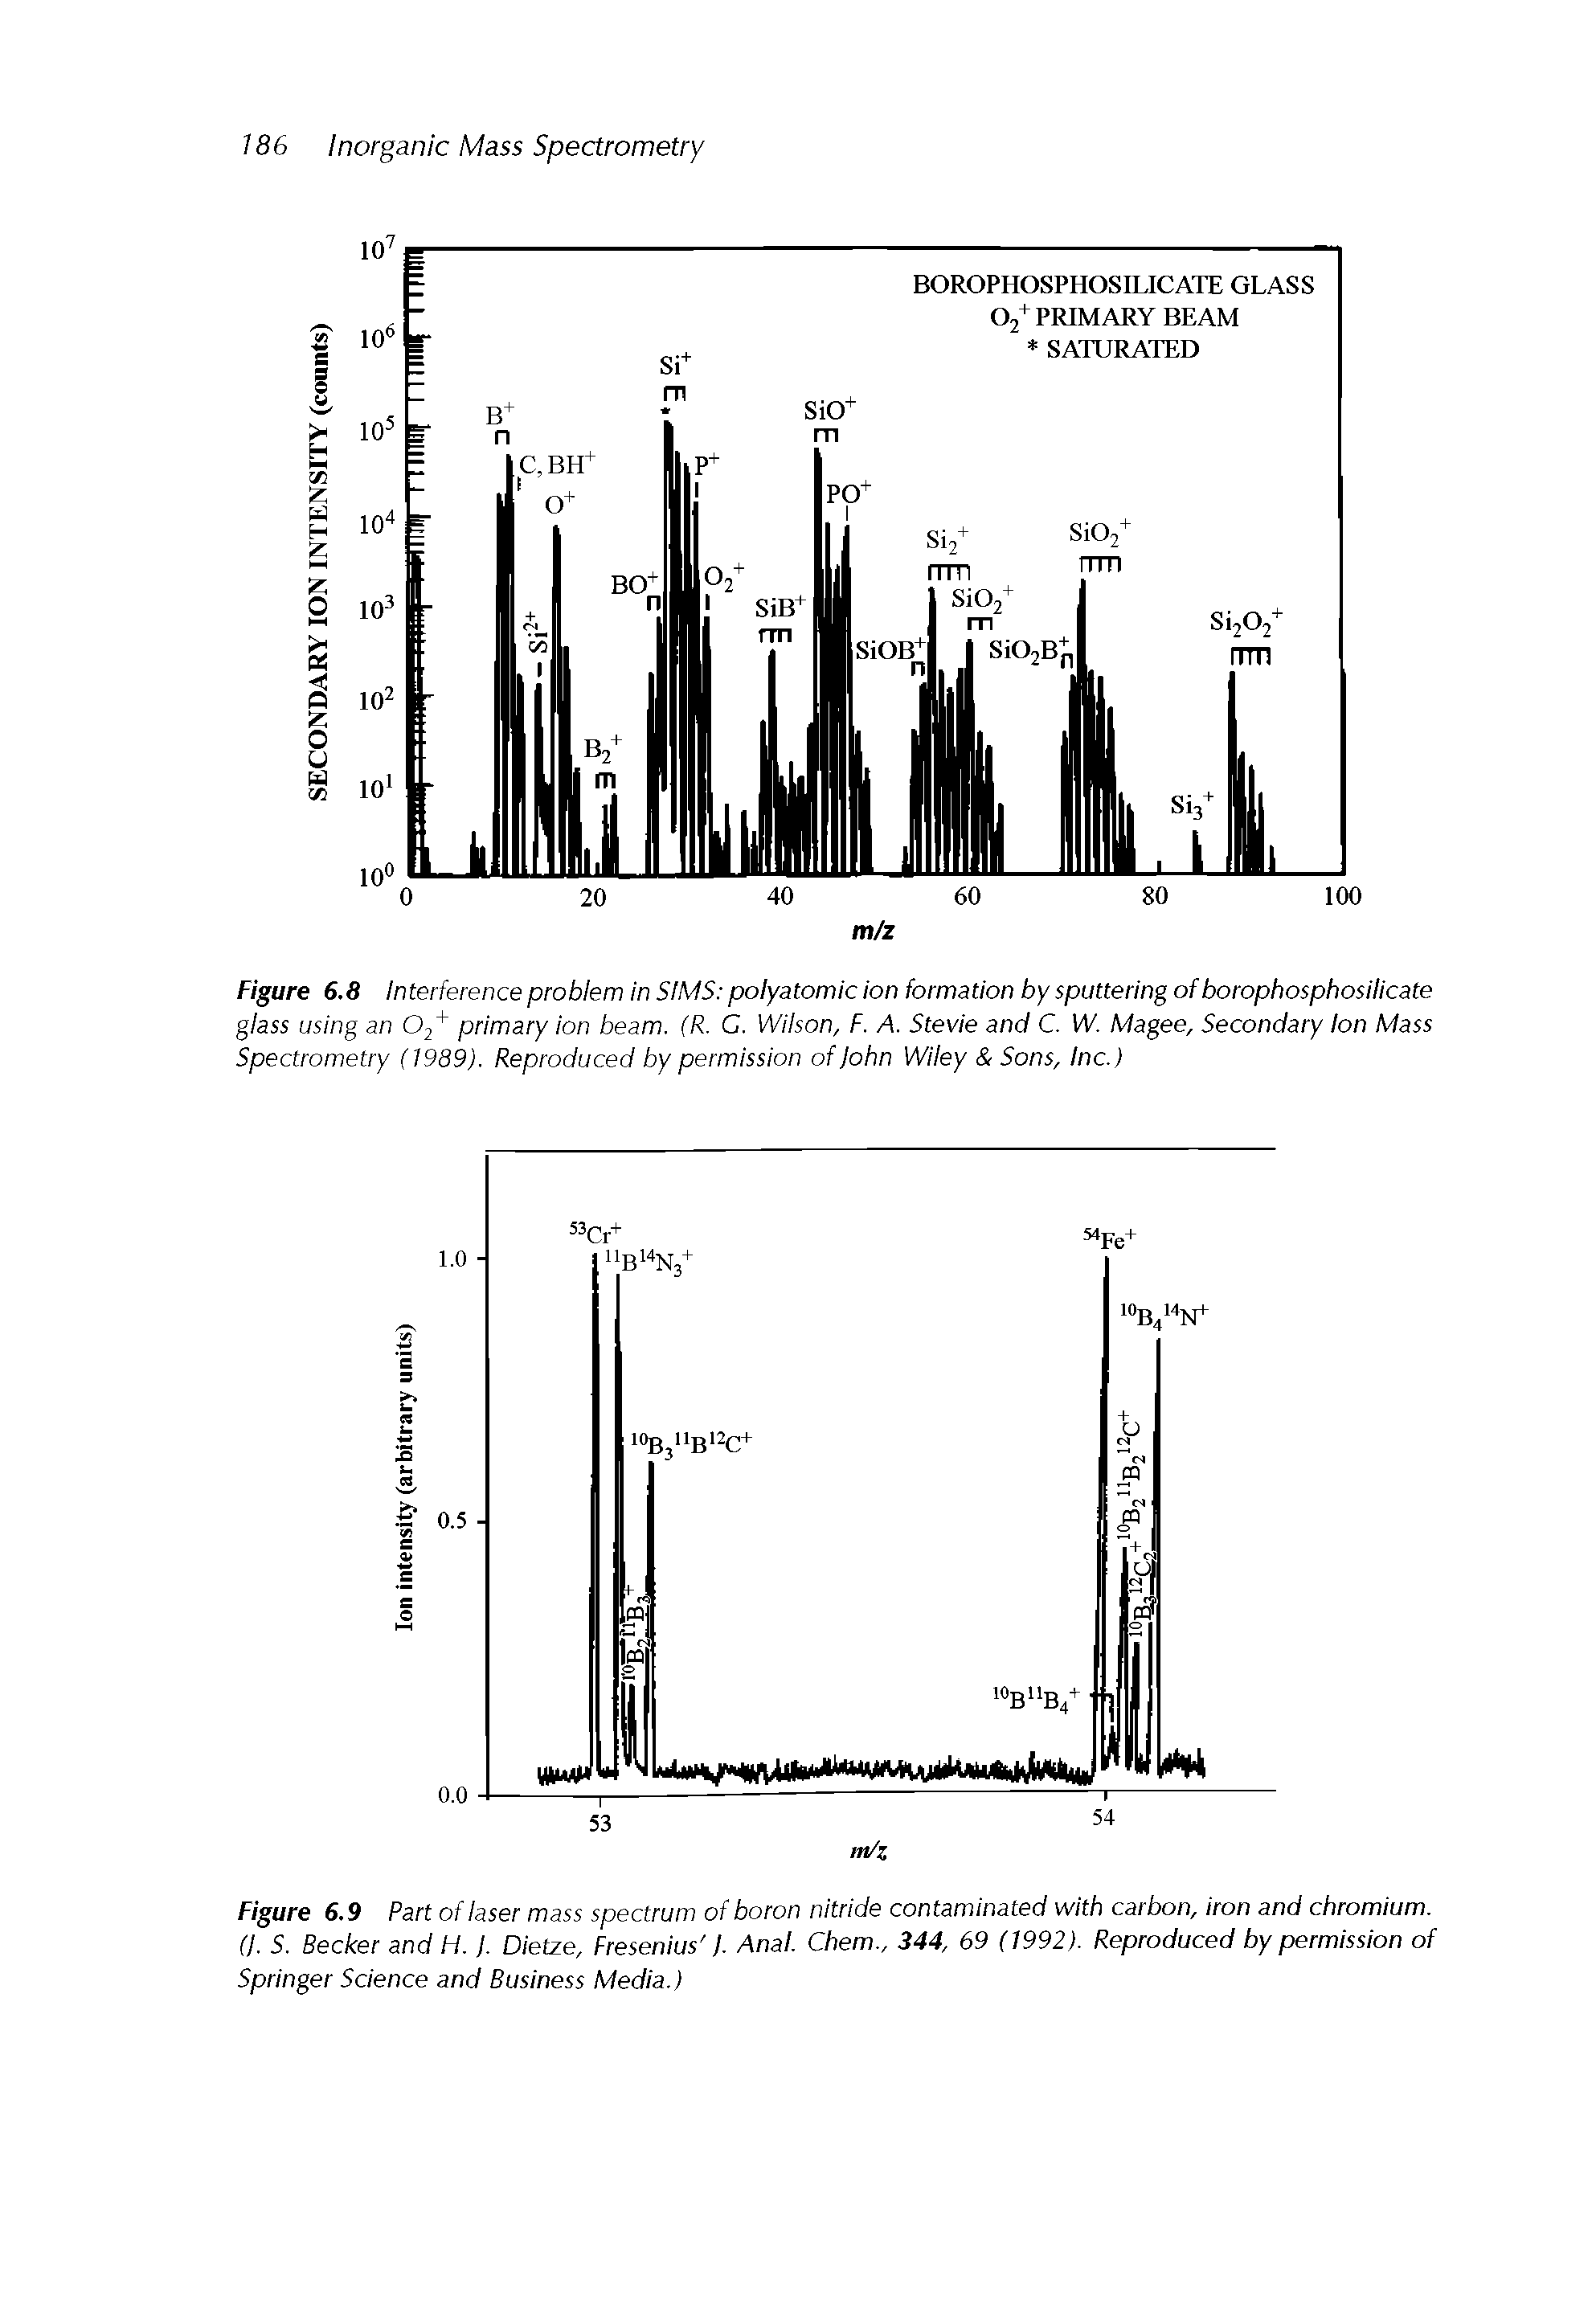 Figure 6.9 Part of laser mass spectrum of boron nitride contaminated with carbon, iron and chromium. (I. S. Becker and H. ). Dietze, Fresenius /. Anal. Chem., 344, 69 (1992). Reproduced by permission of Springer Science and Business Media.)...